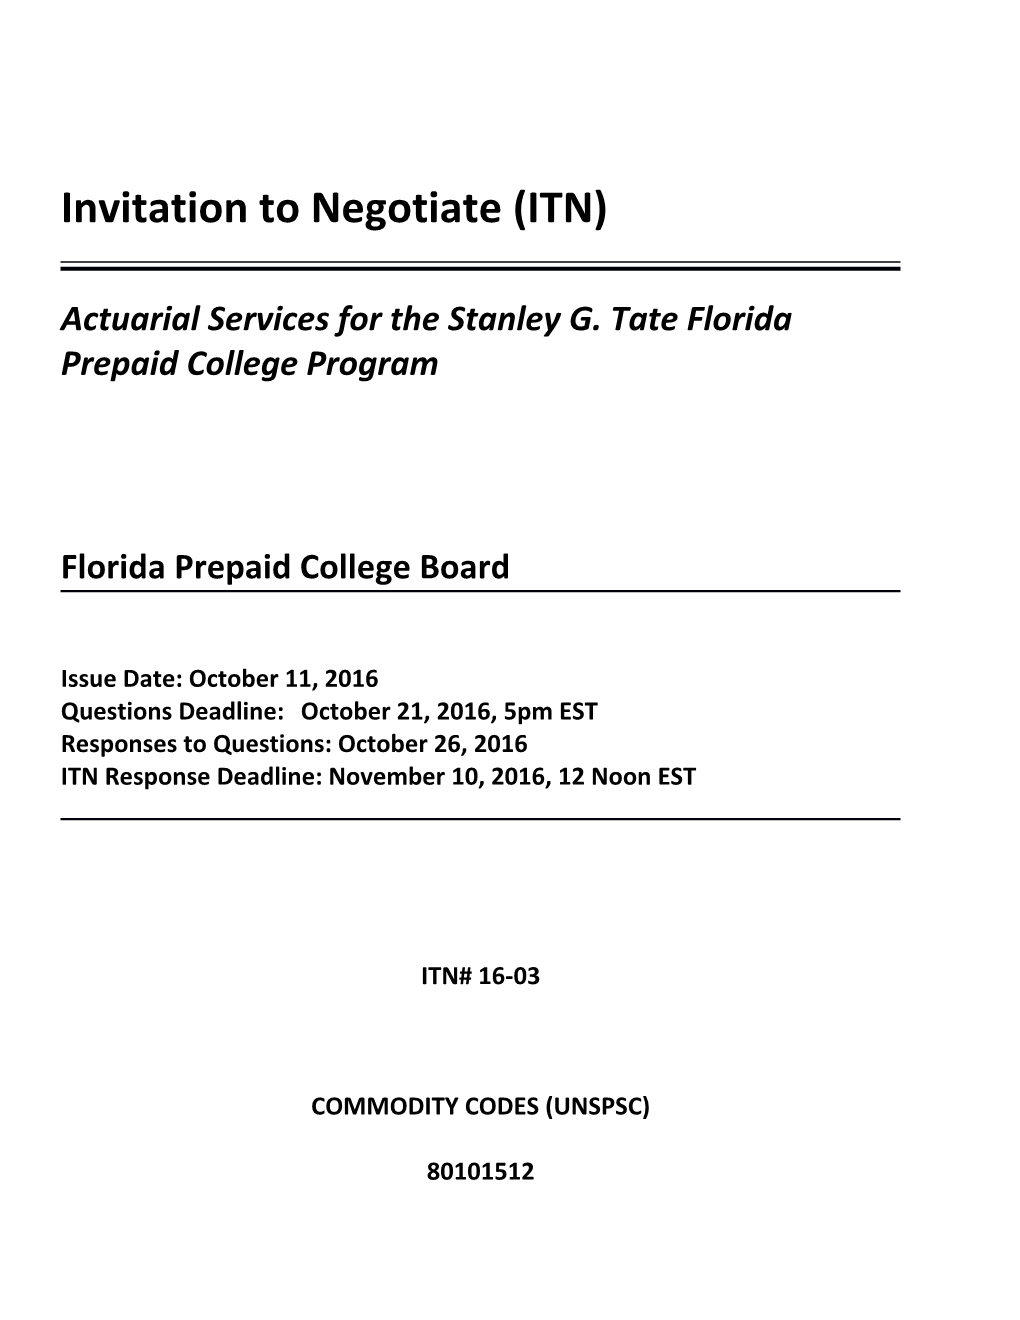 Actuarial Services for the Stanley G. Tate Florida Prepaid College Program